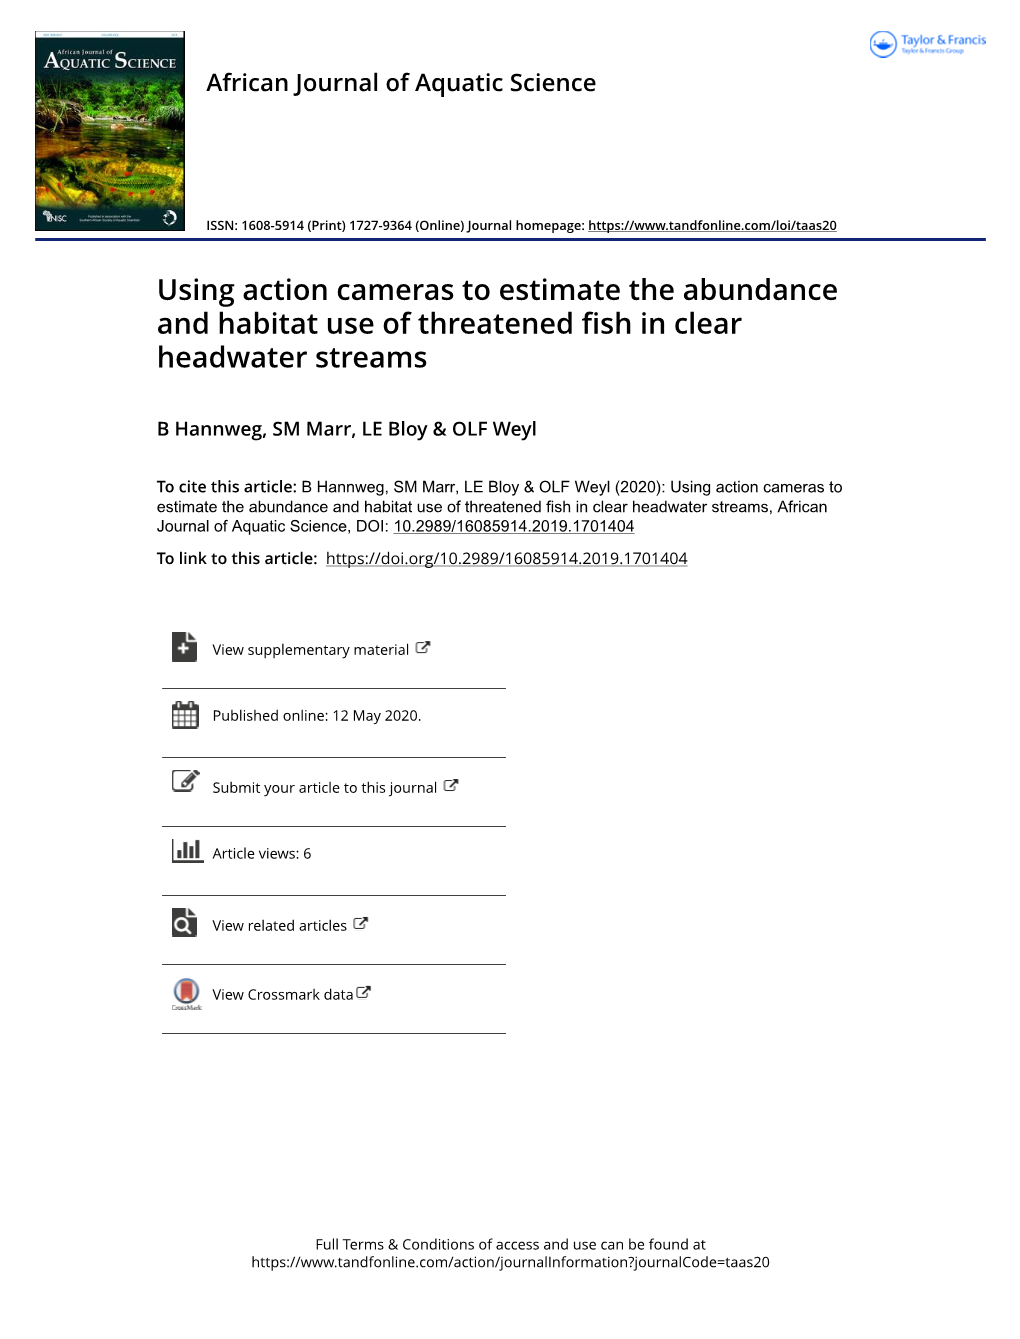 Using Action Cameras to Estimate the Abundance and Habitat Use of Threatened Fish in Clear Headwater Streams